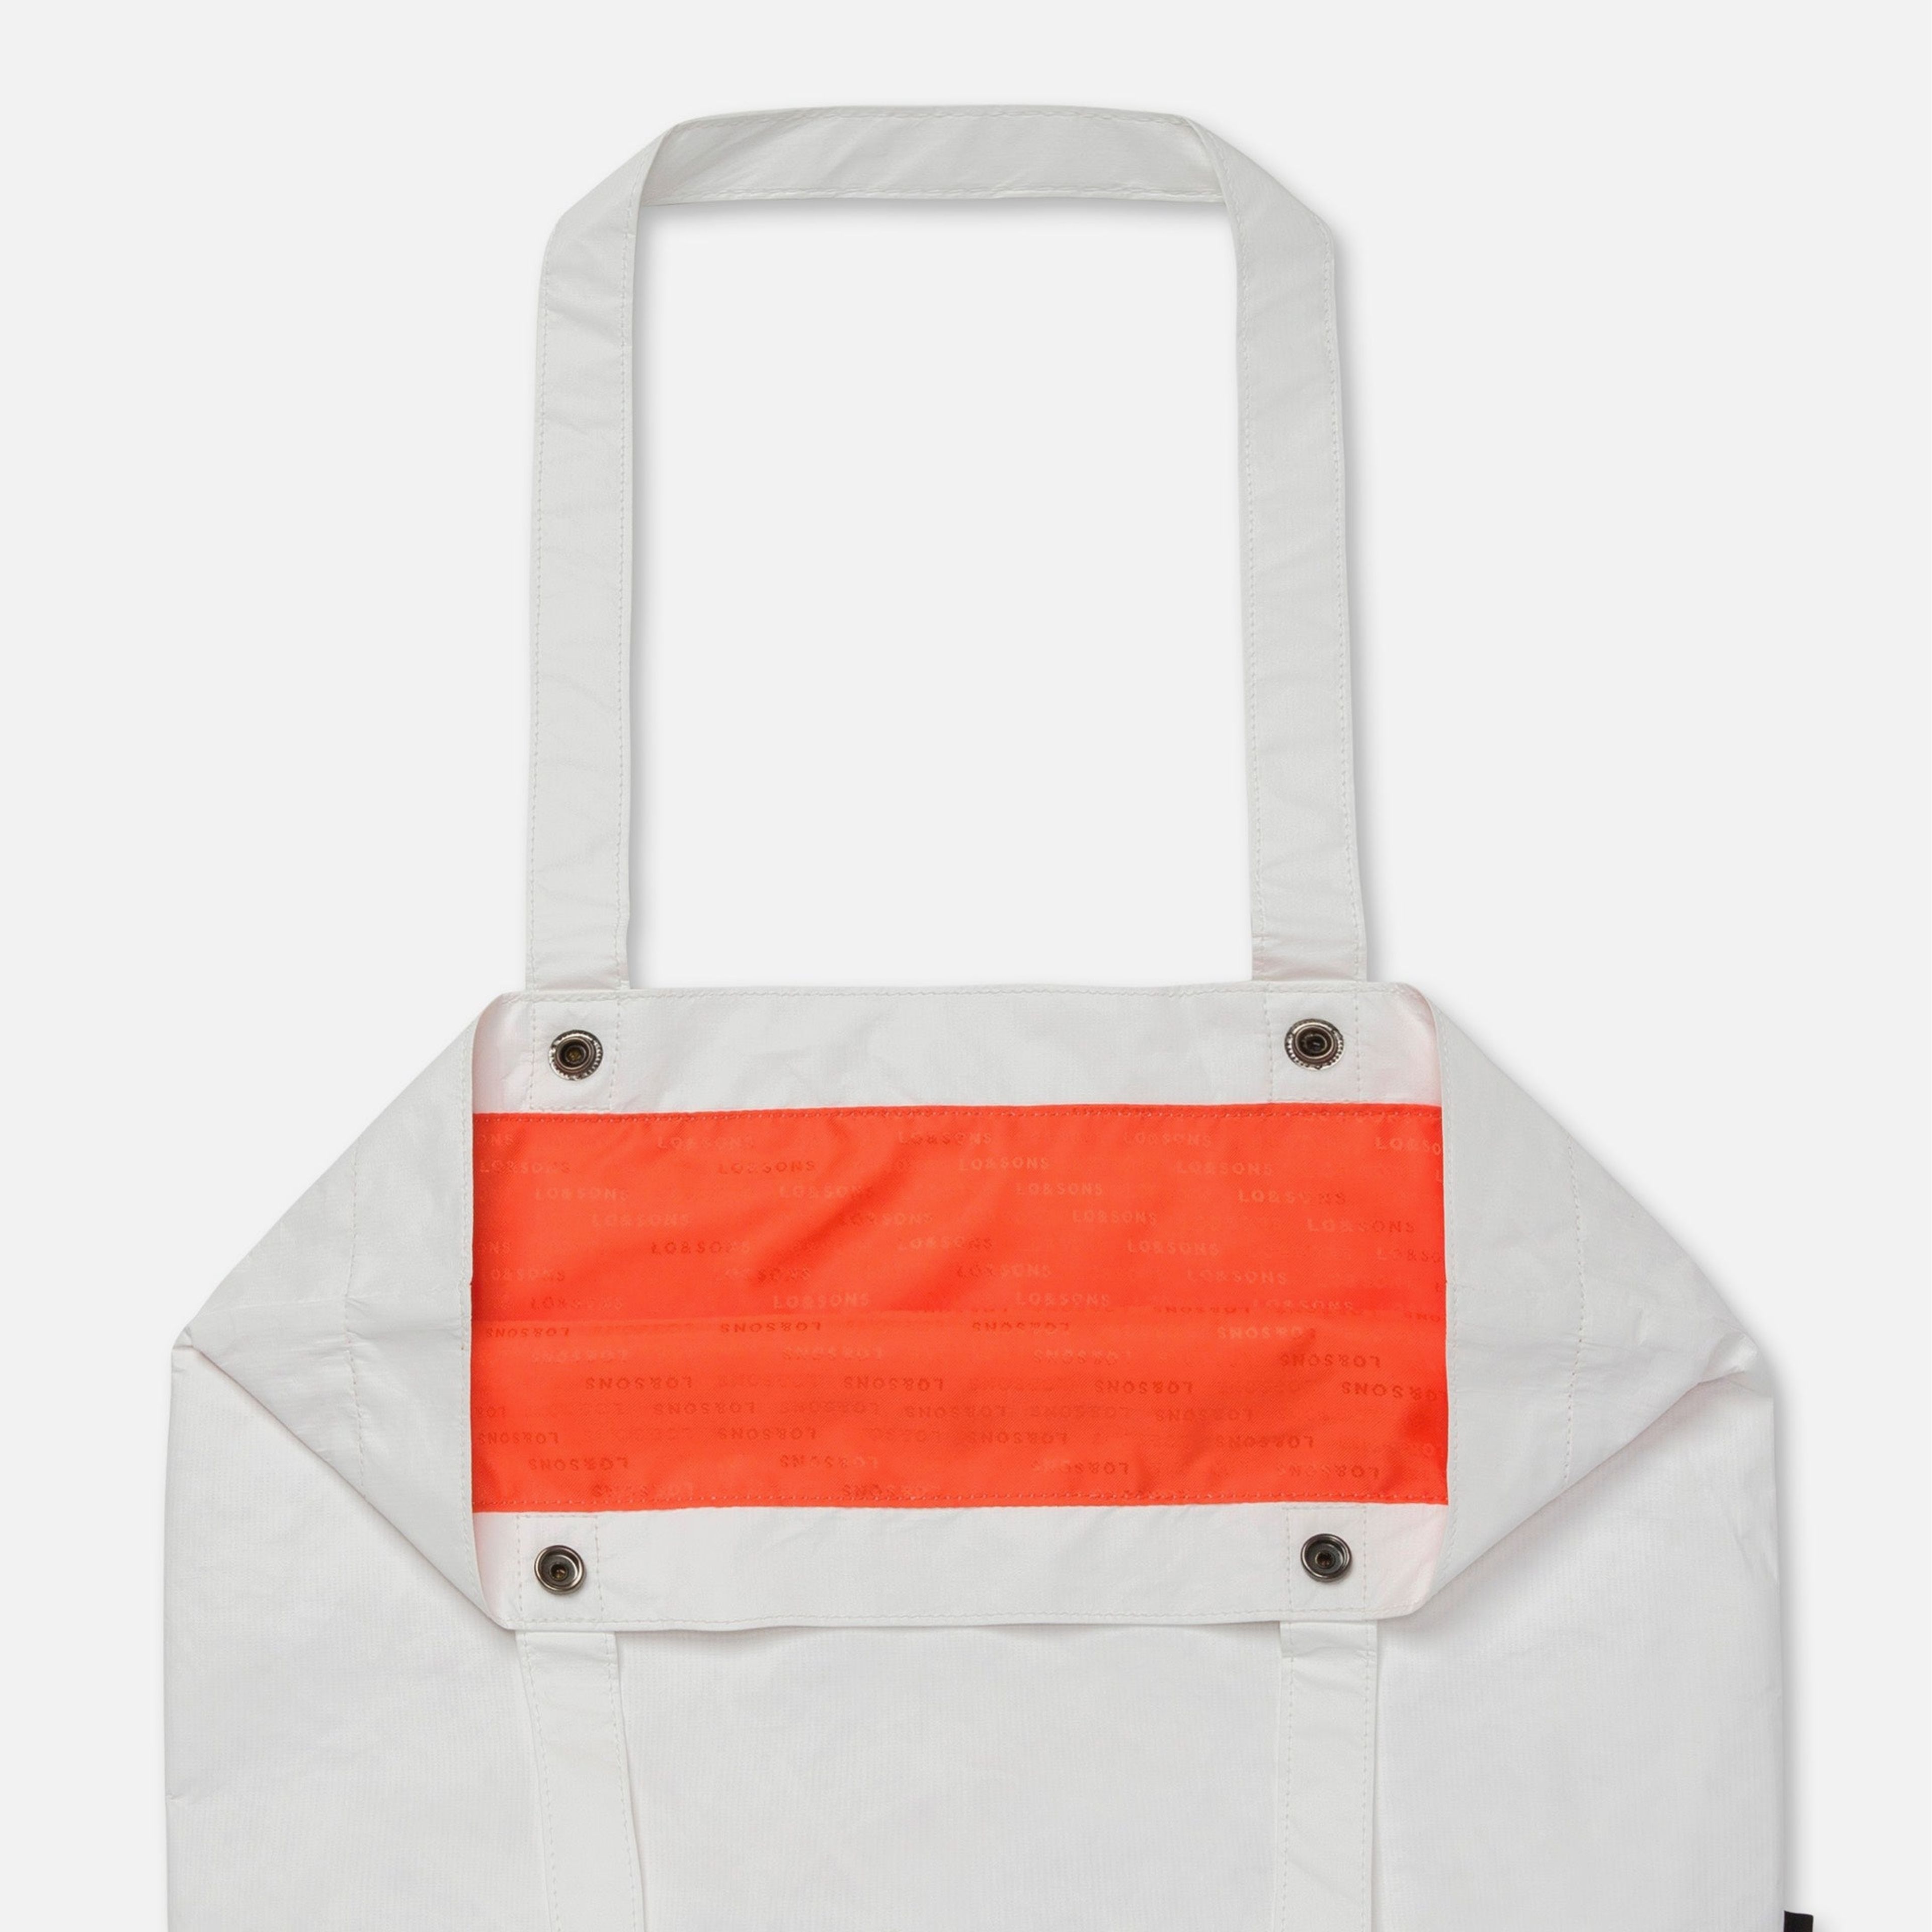 The Del Mar Packable Tote Small - Tyvek - White